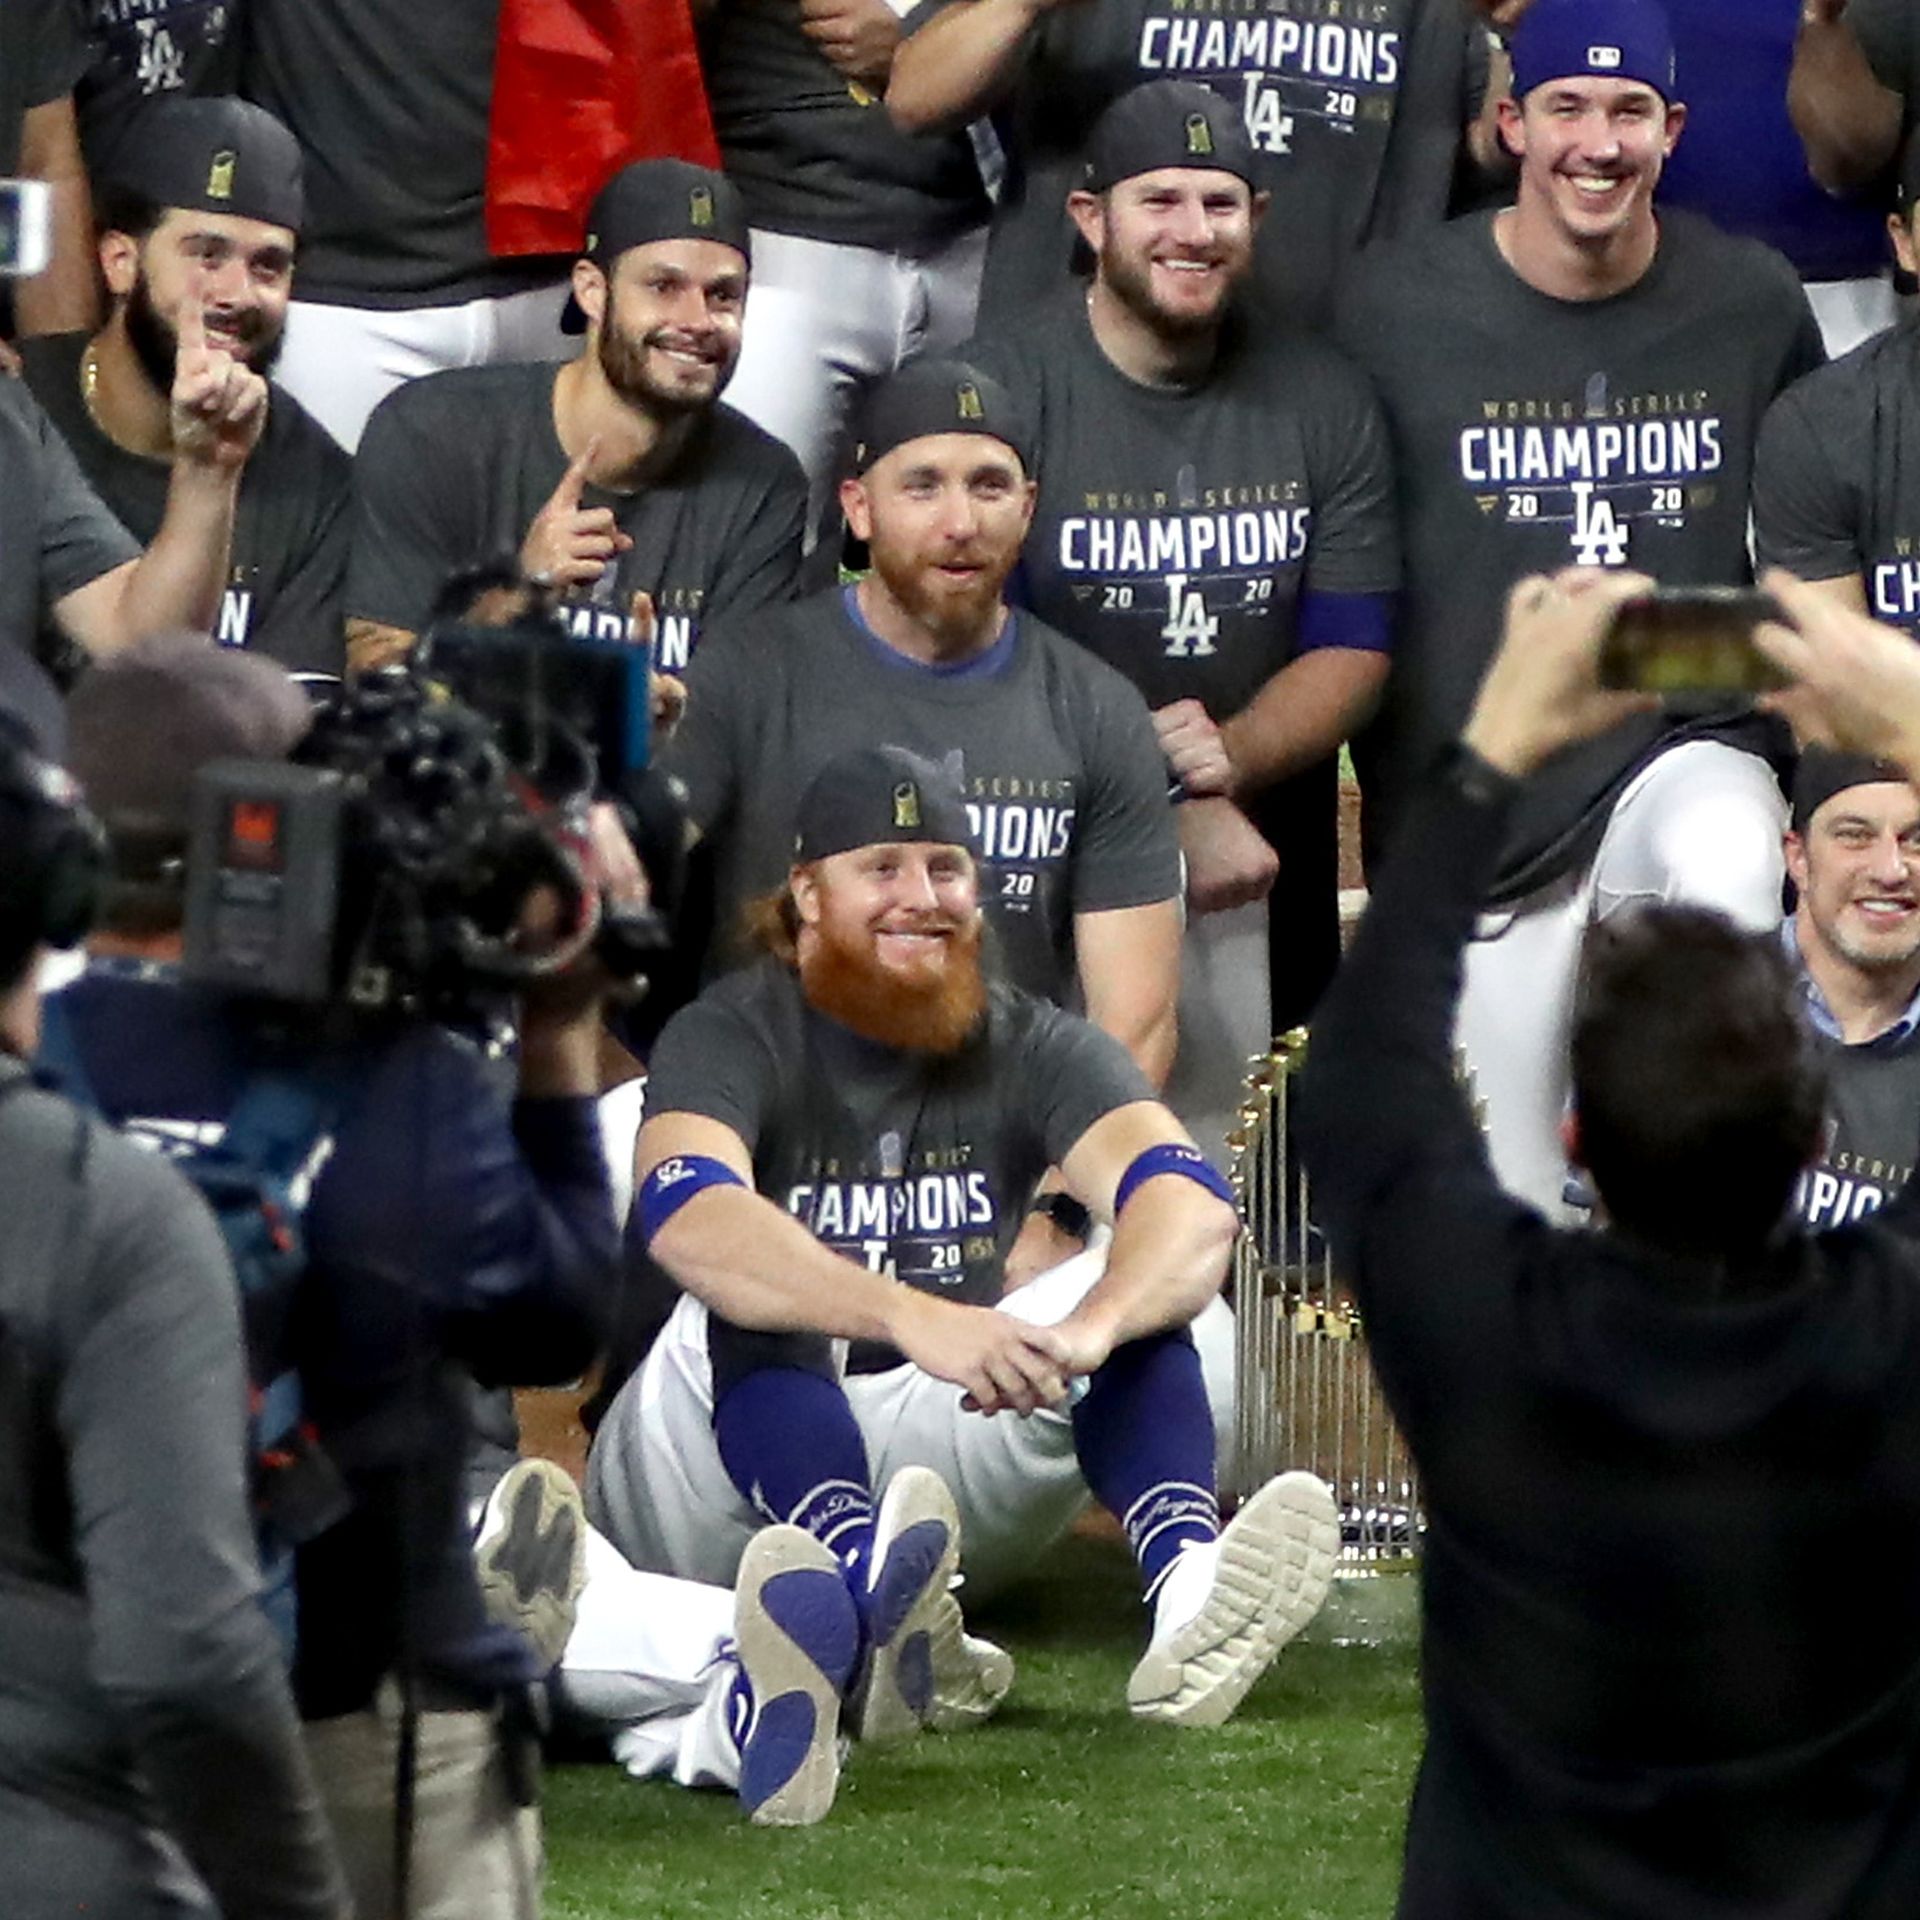 Justin Turner tests positive as Dodgers win World Series